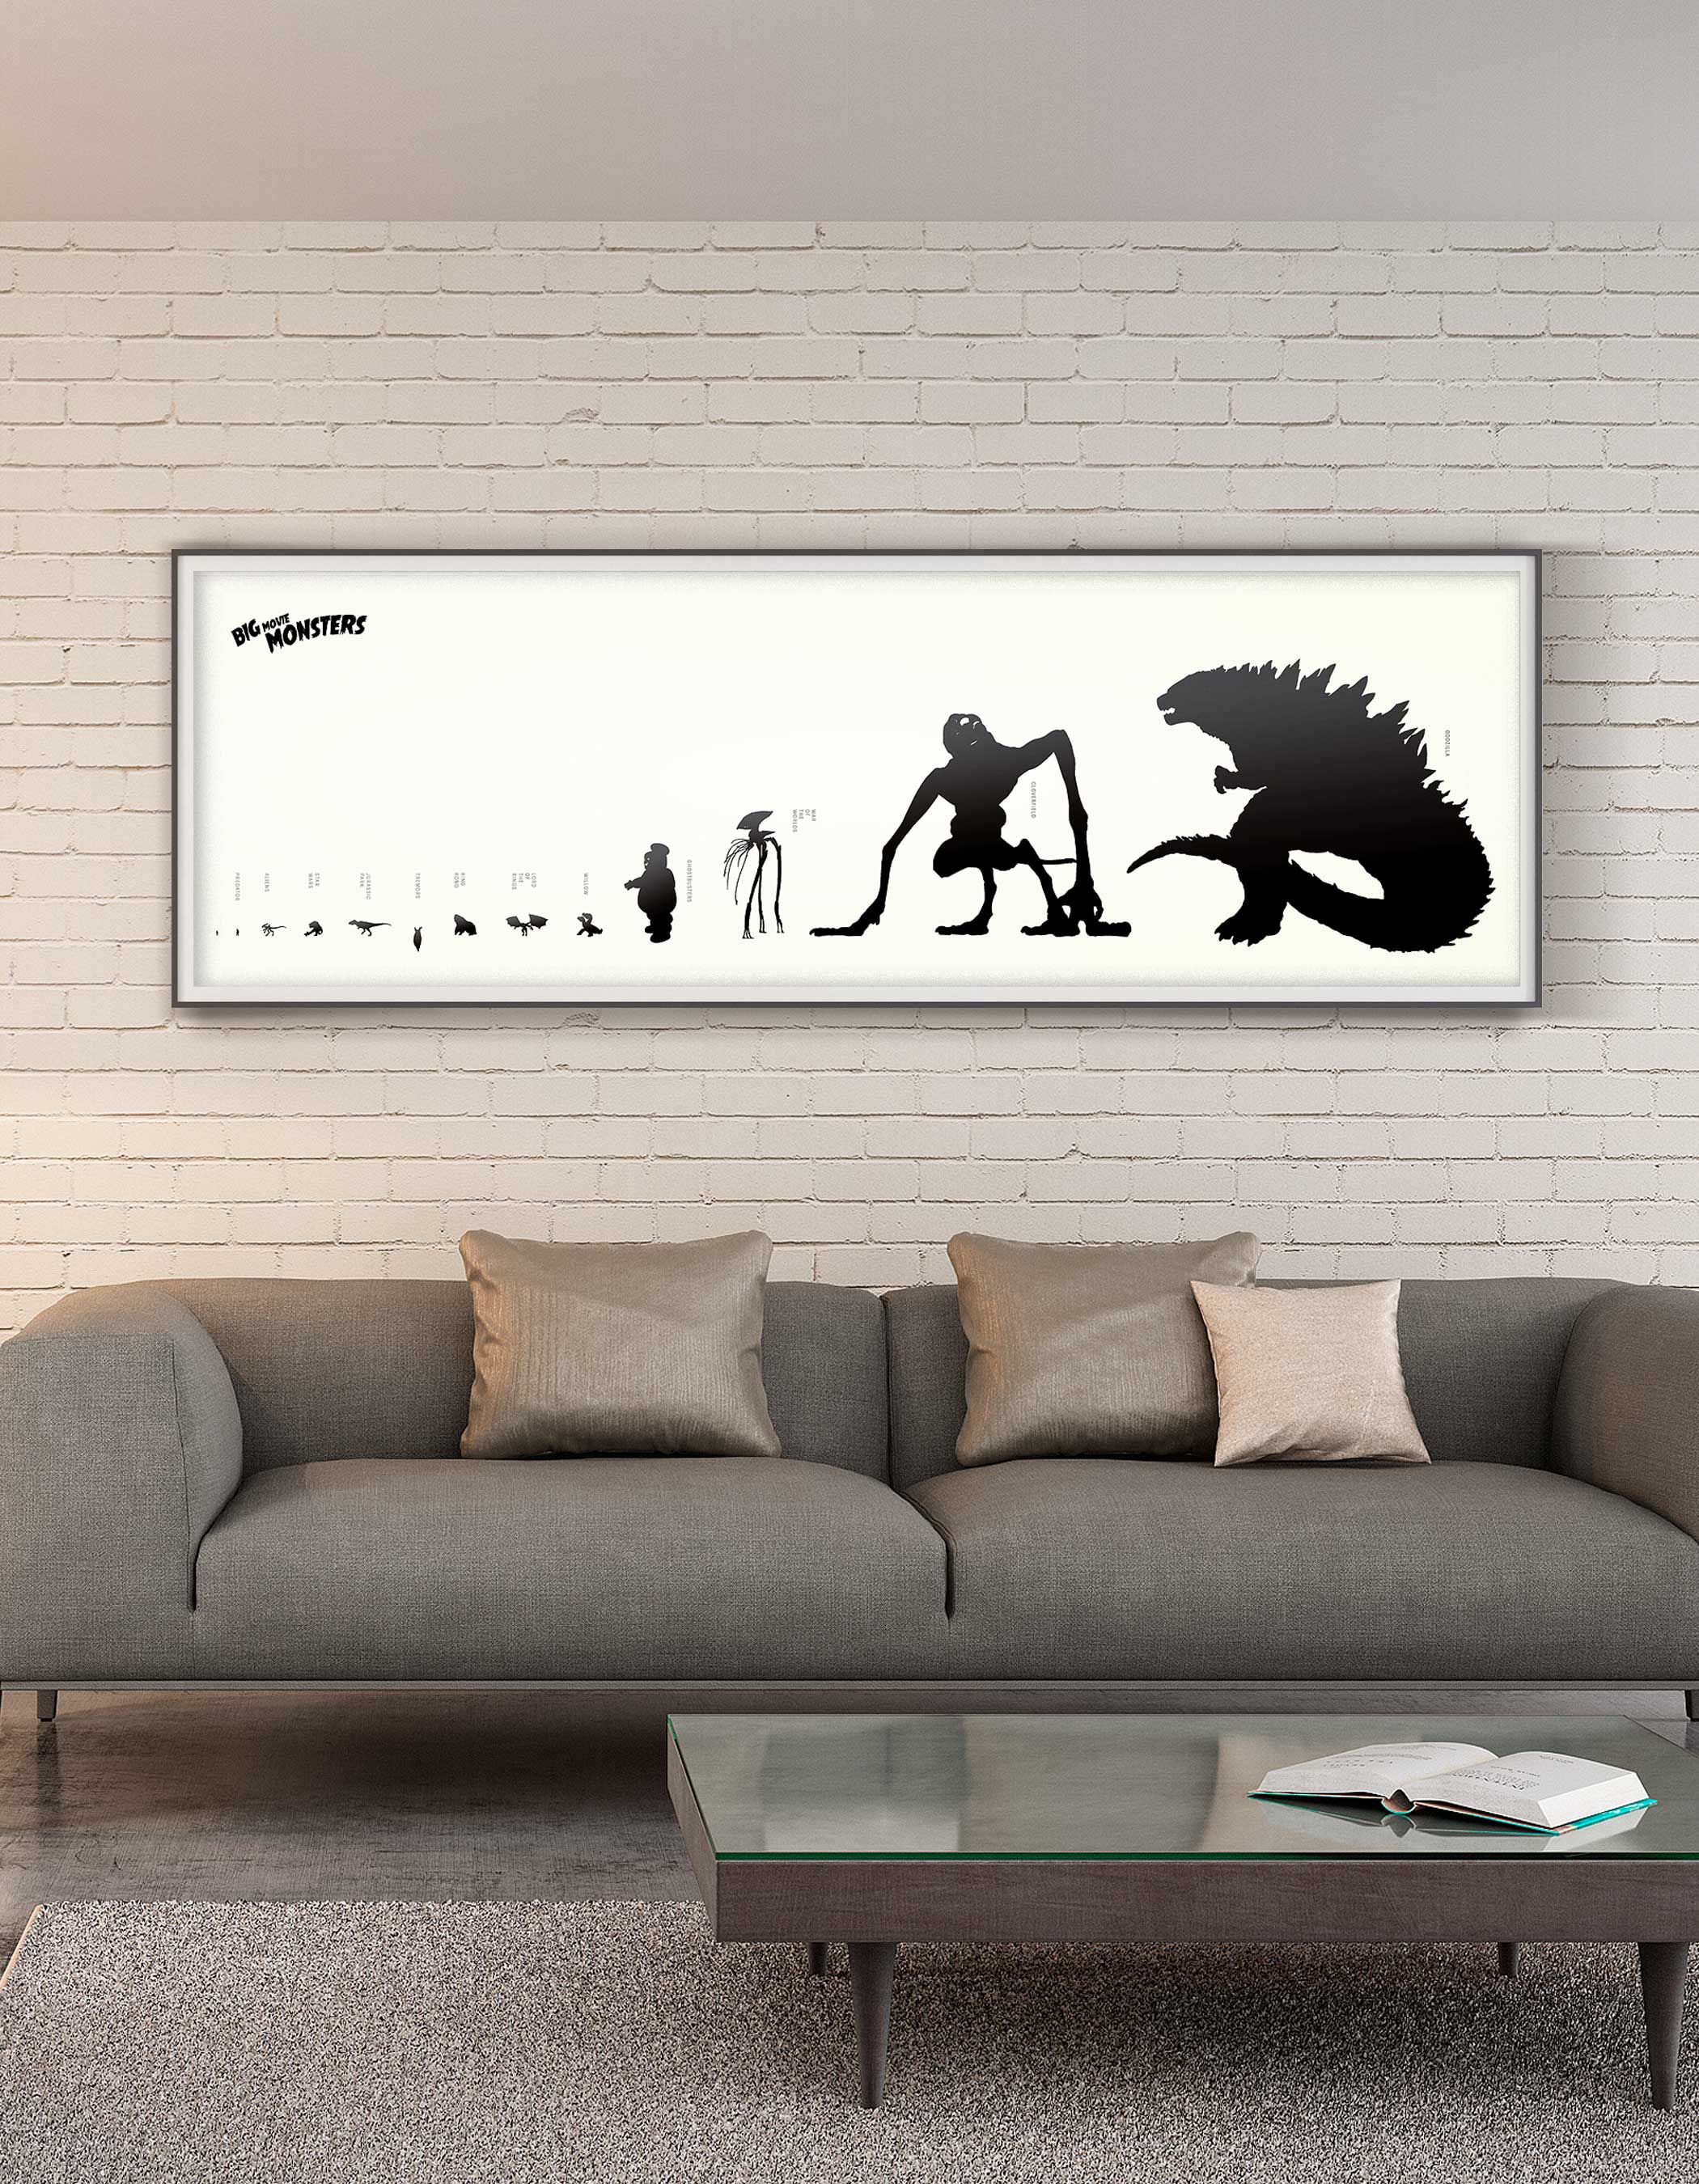 mockup of Movie Monsters poster featuring Godzilla, Cloverfield and Ghostbusters